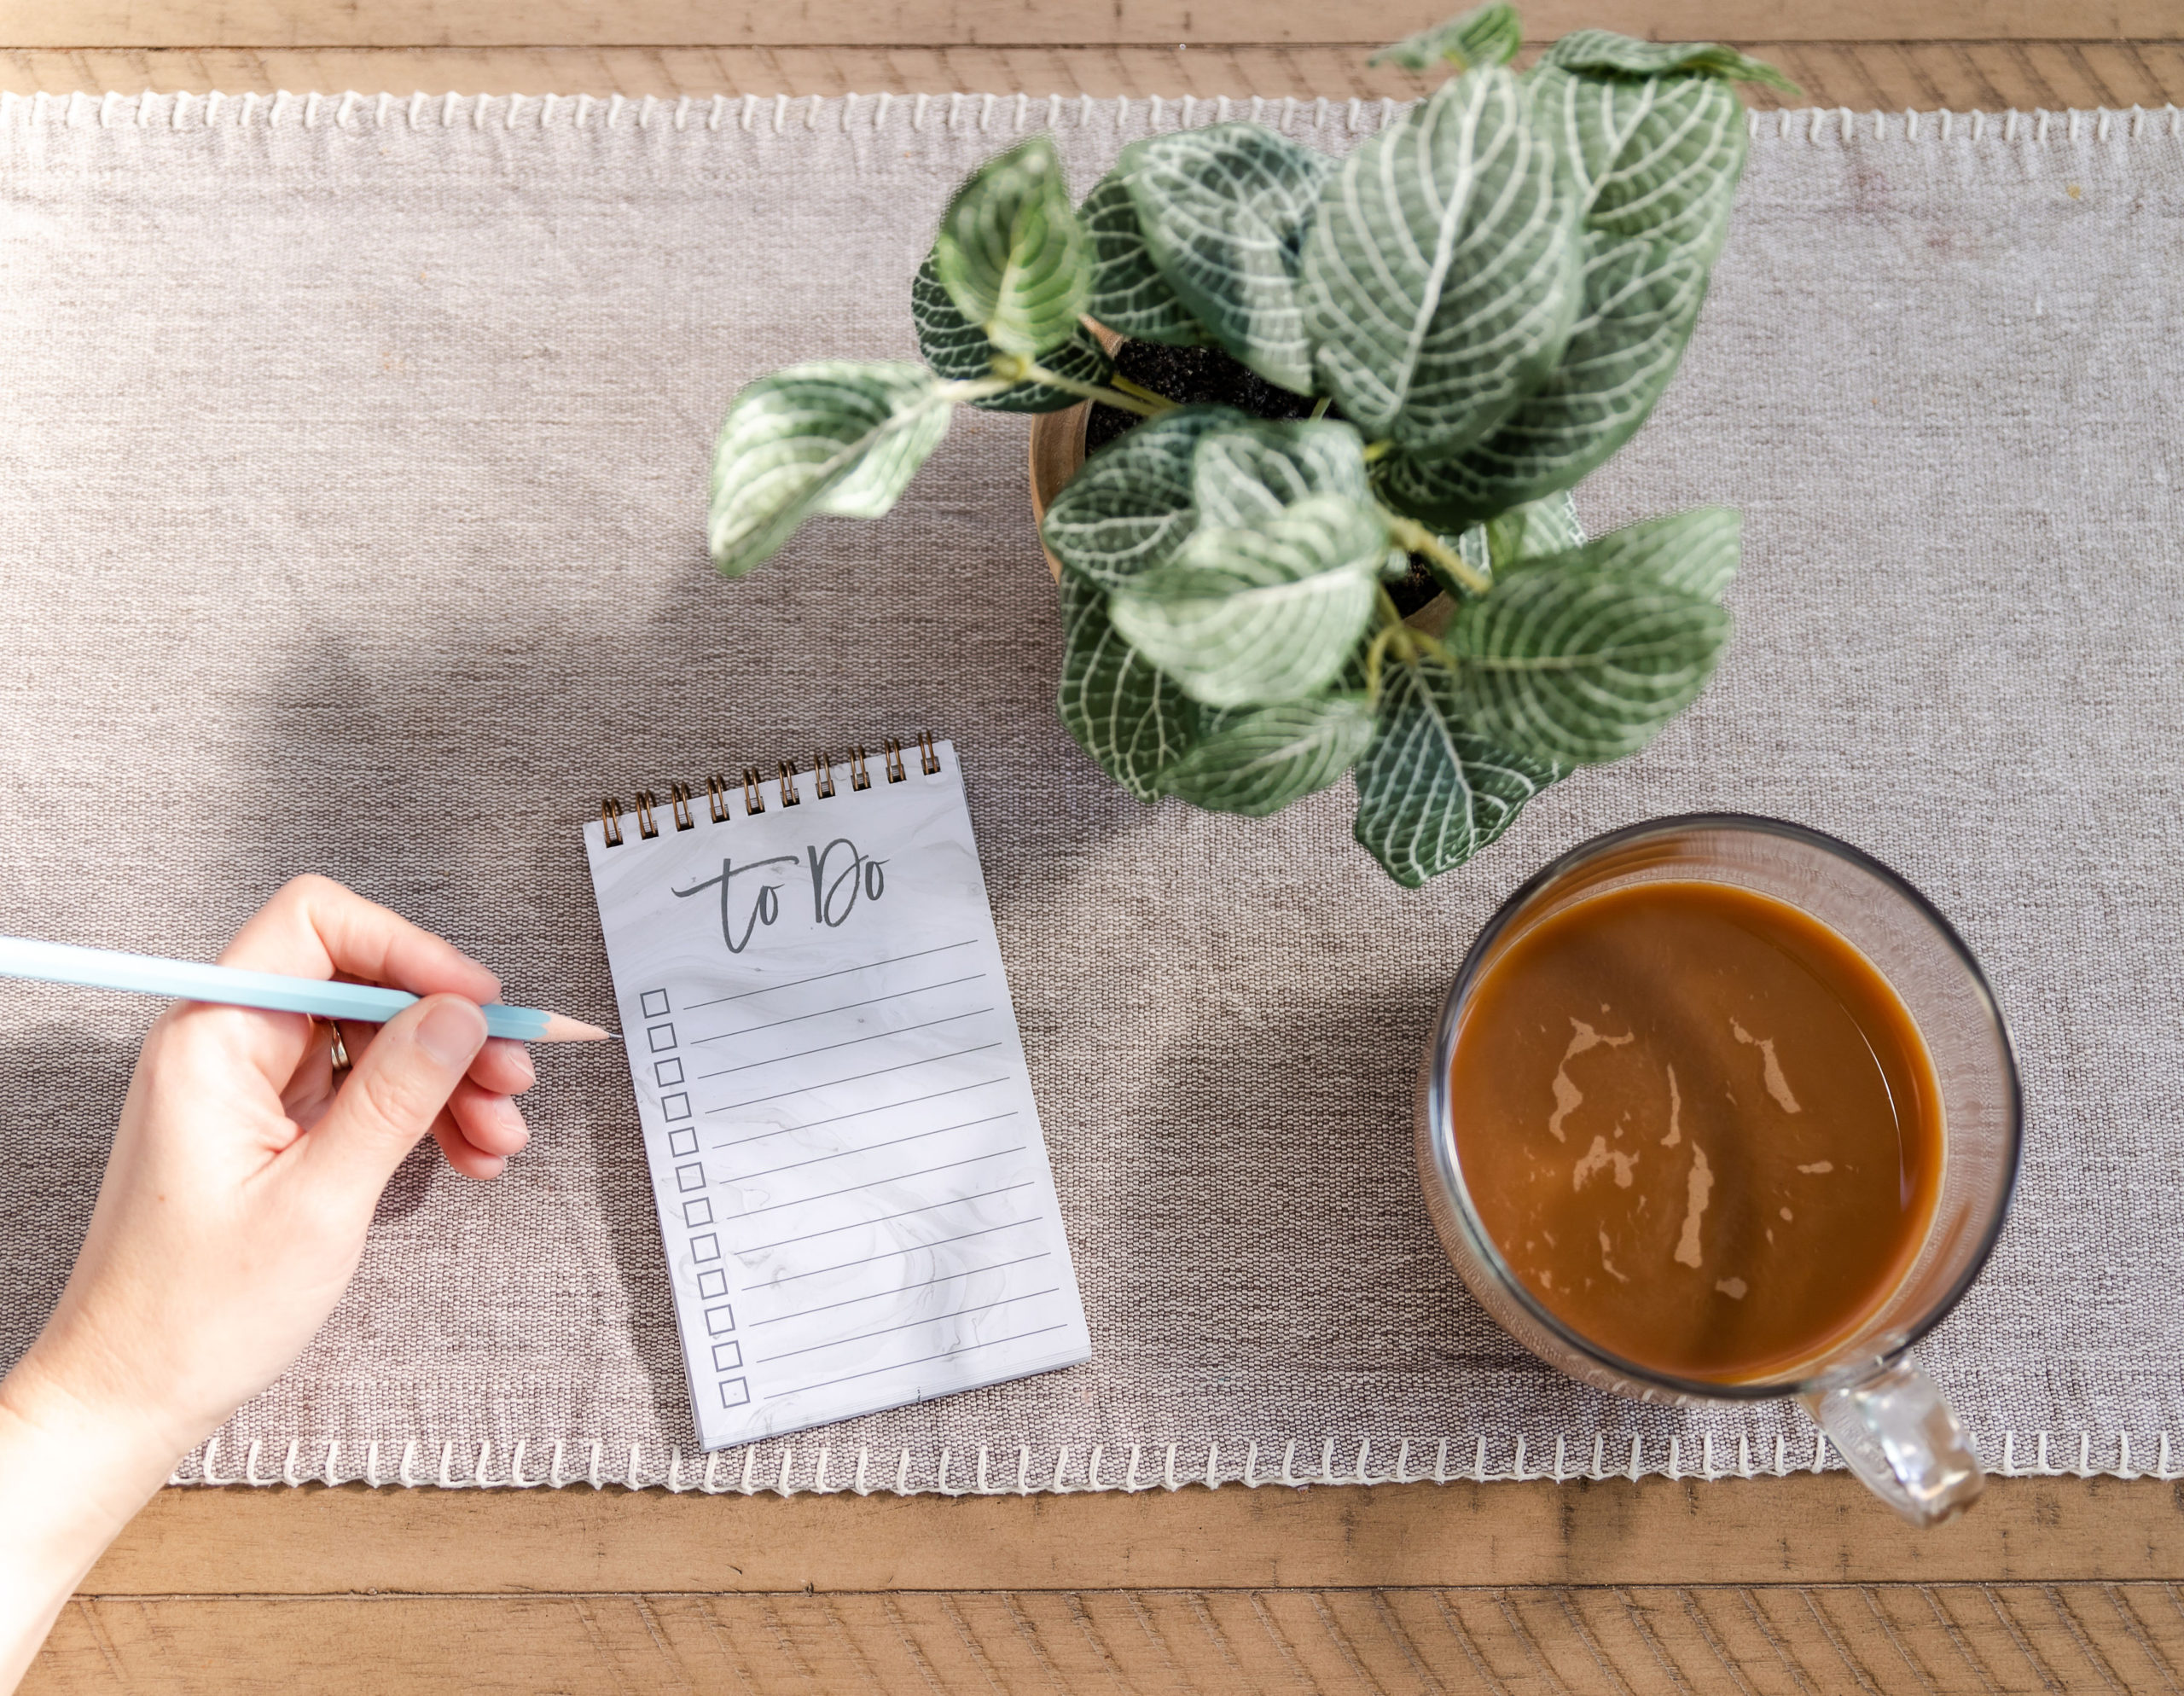 hand-holding-blue-pencil-writing-on-a-note-pad-to-do-with-glass-of-coffee-and-flower-pot-beside